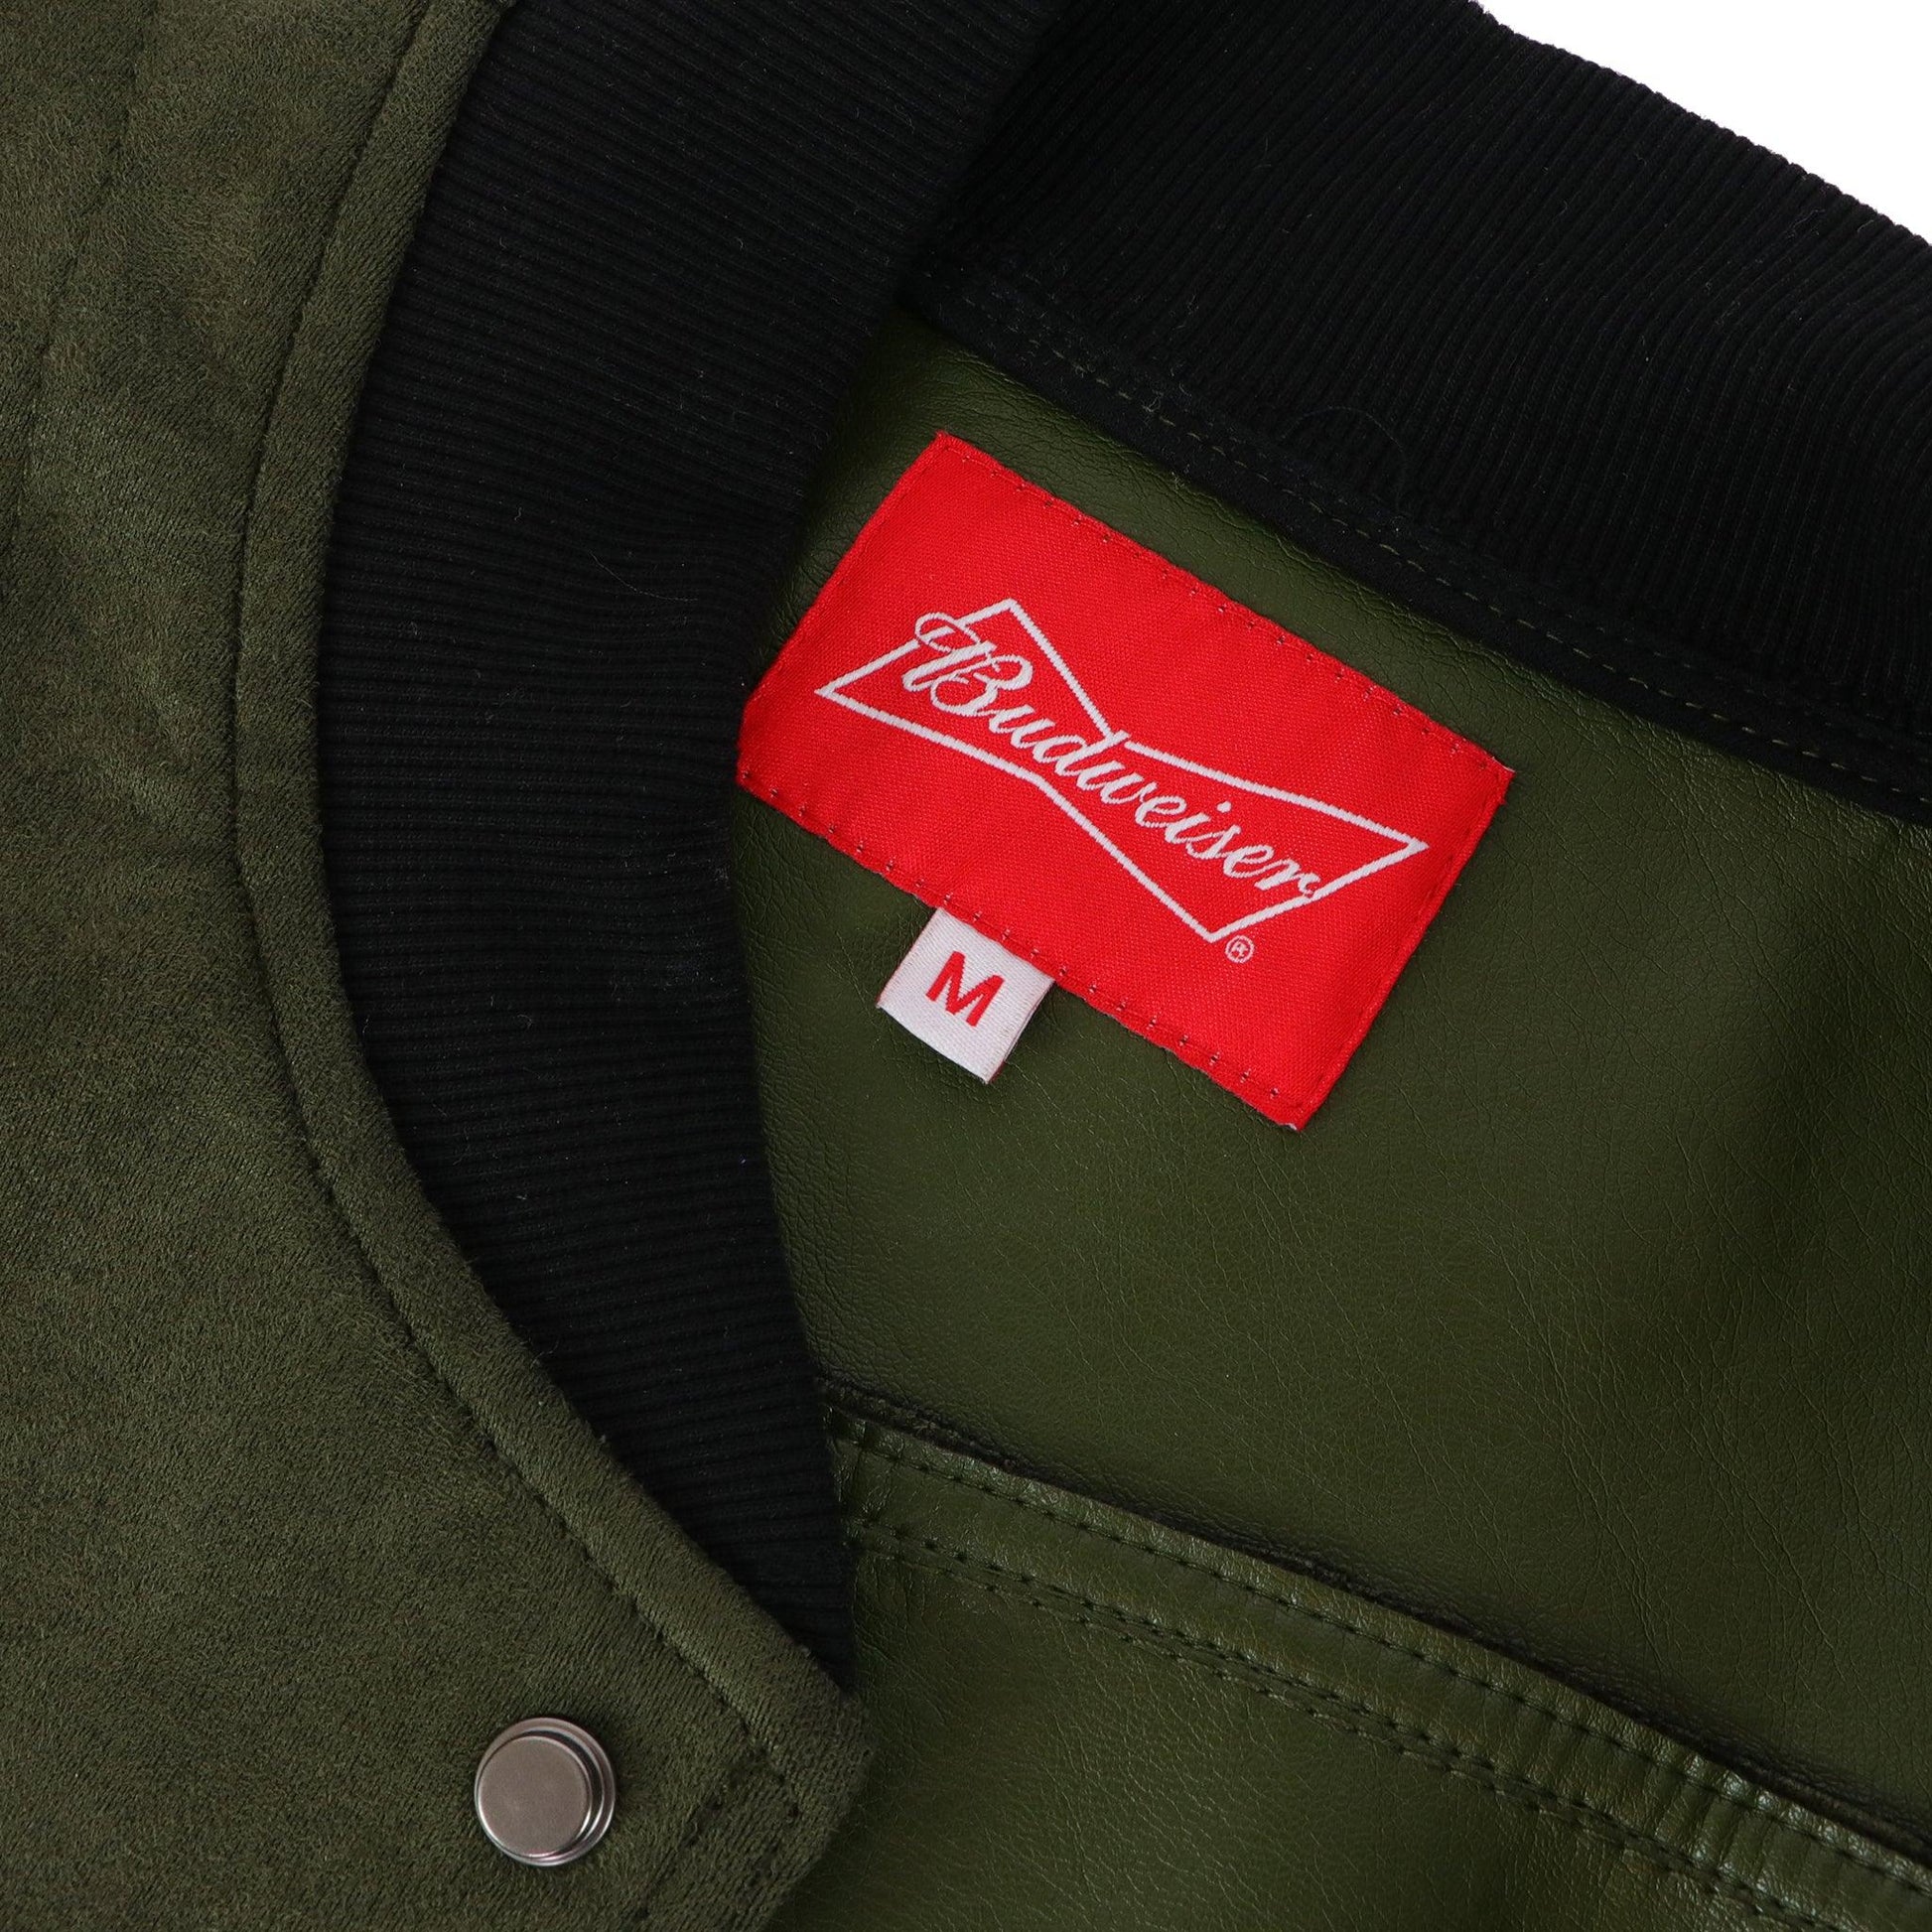 detail of budweiser tag on inside of jacket 